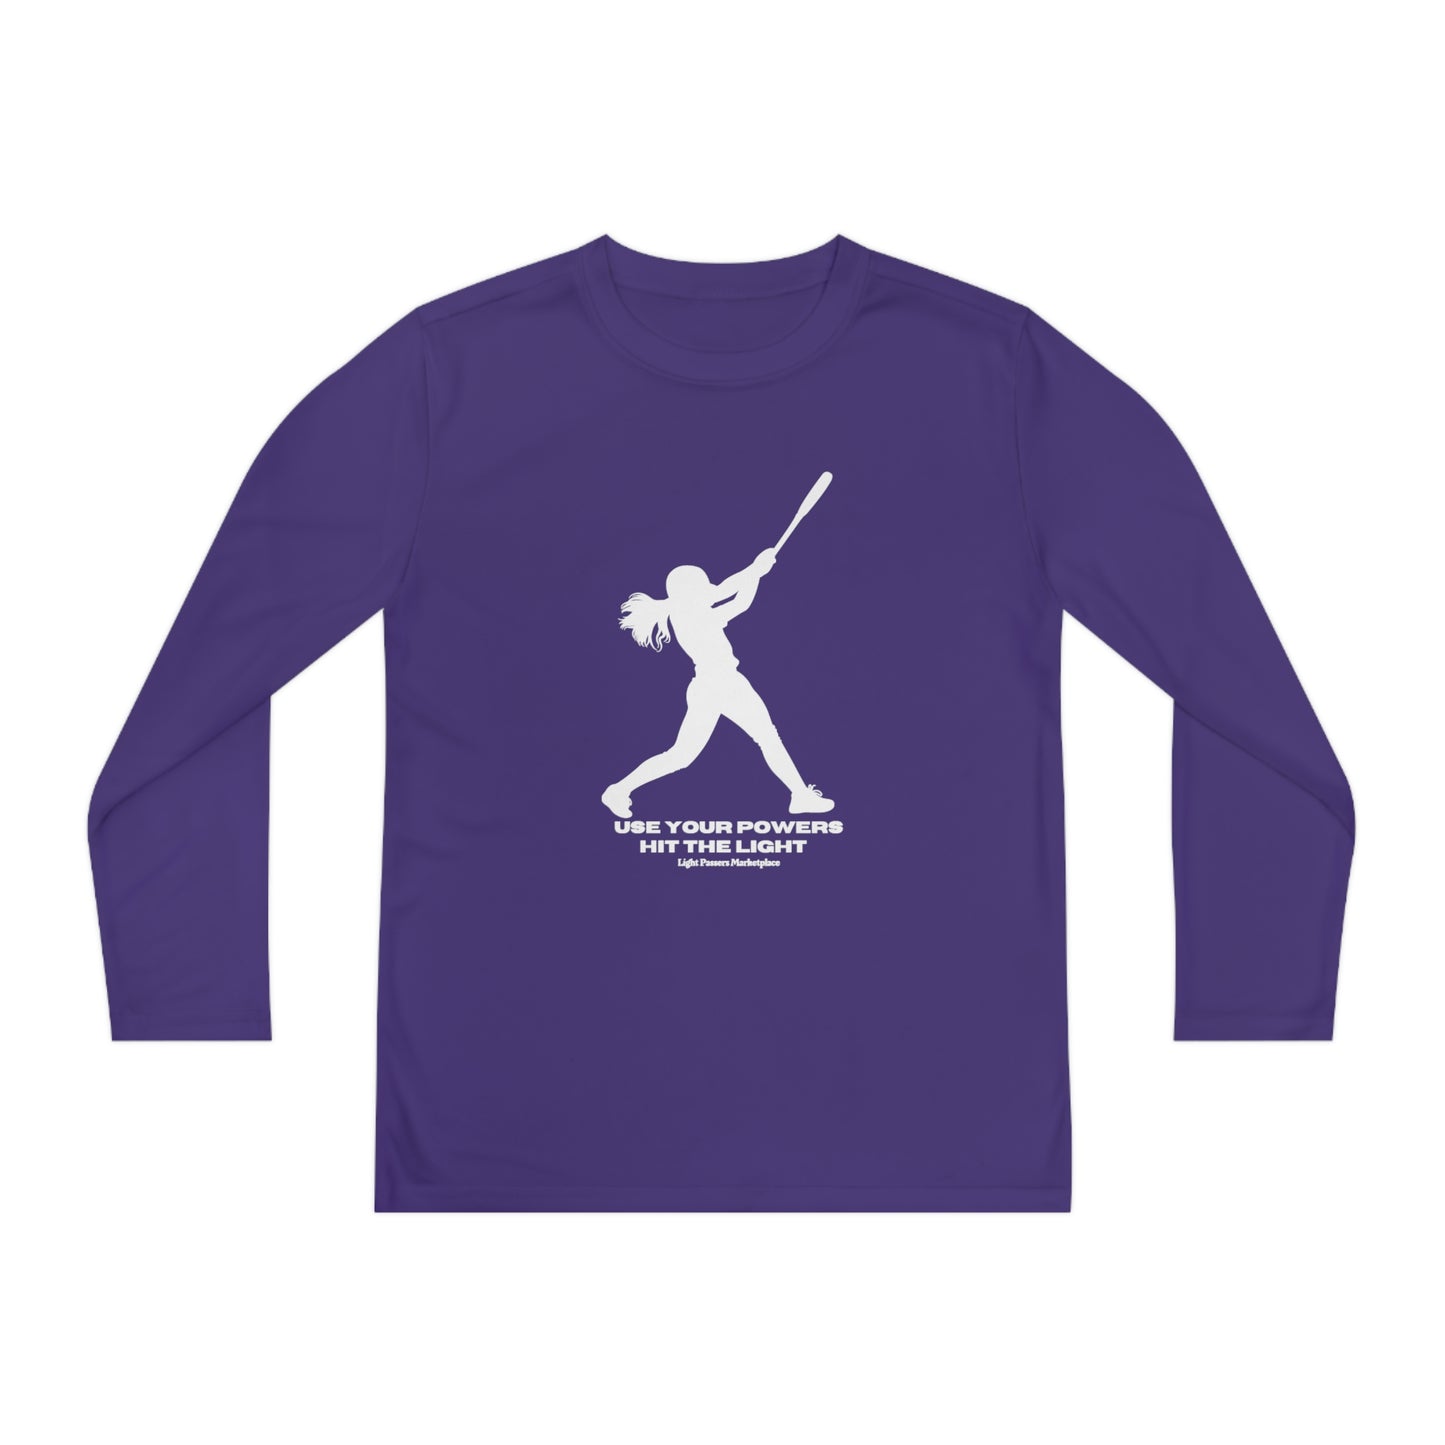 A purple long sleeve tee with a white silhouette of a girl swinging a bat. Sport-Tek PosiCharge® Competitor™ tee, 100% moisture-wicking polyester, lightweight, tear-away label, ideal for active kids.